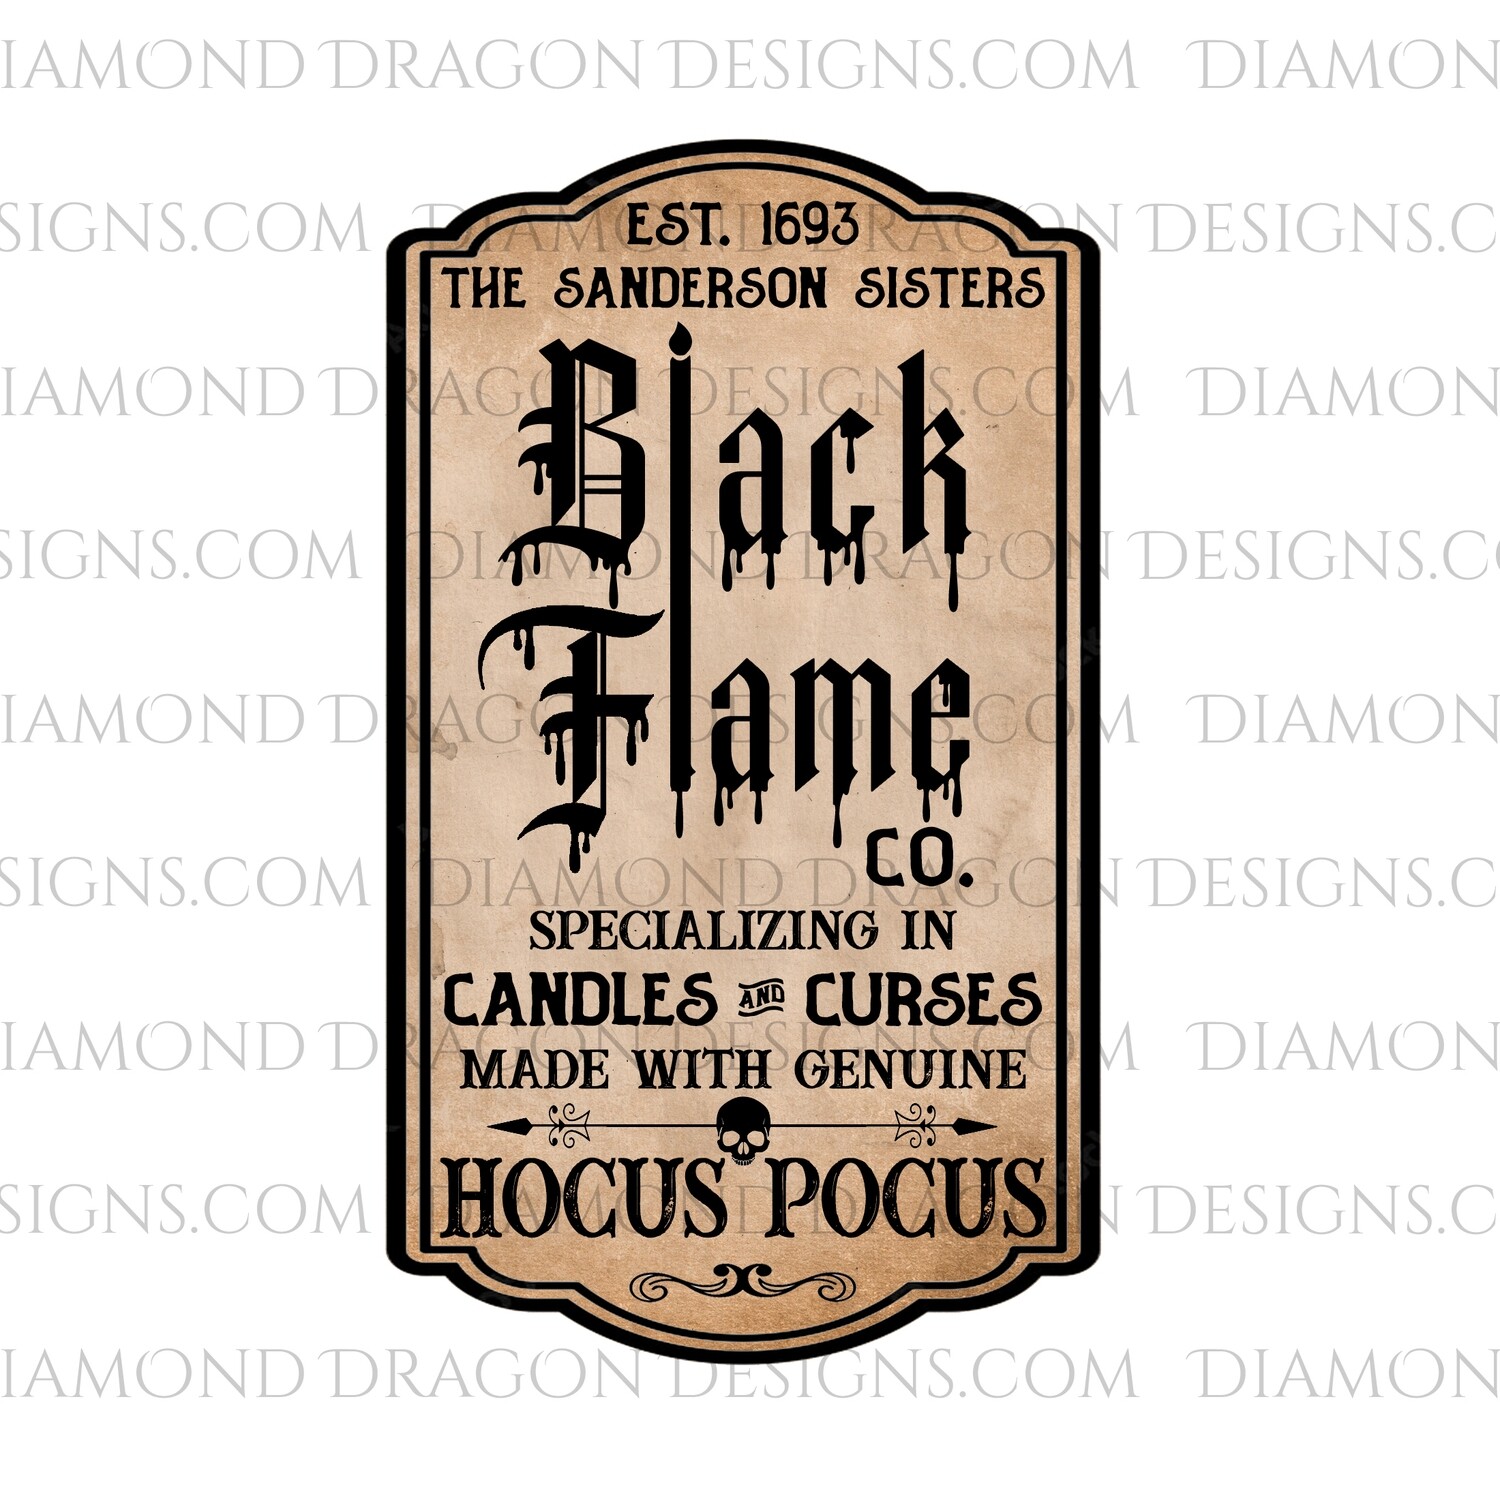 Halloween - Black Flame Candle Label for Tumblers, Image File, Instant Digital Image